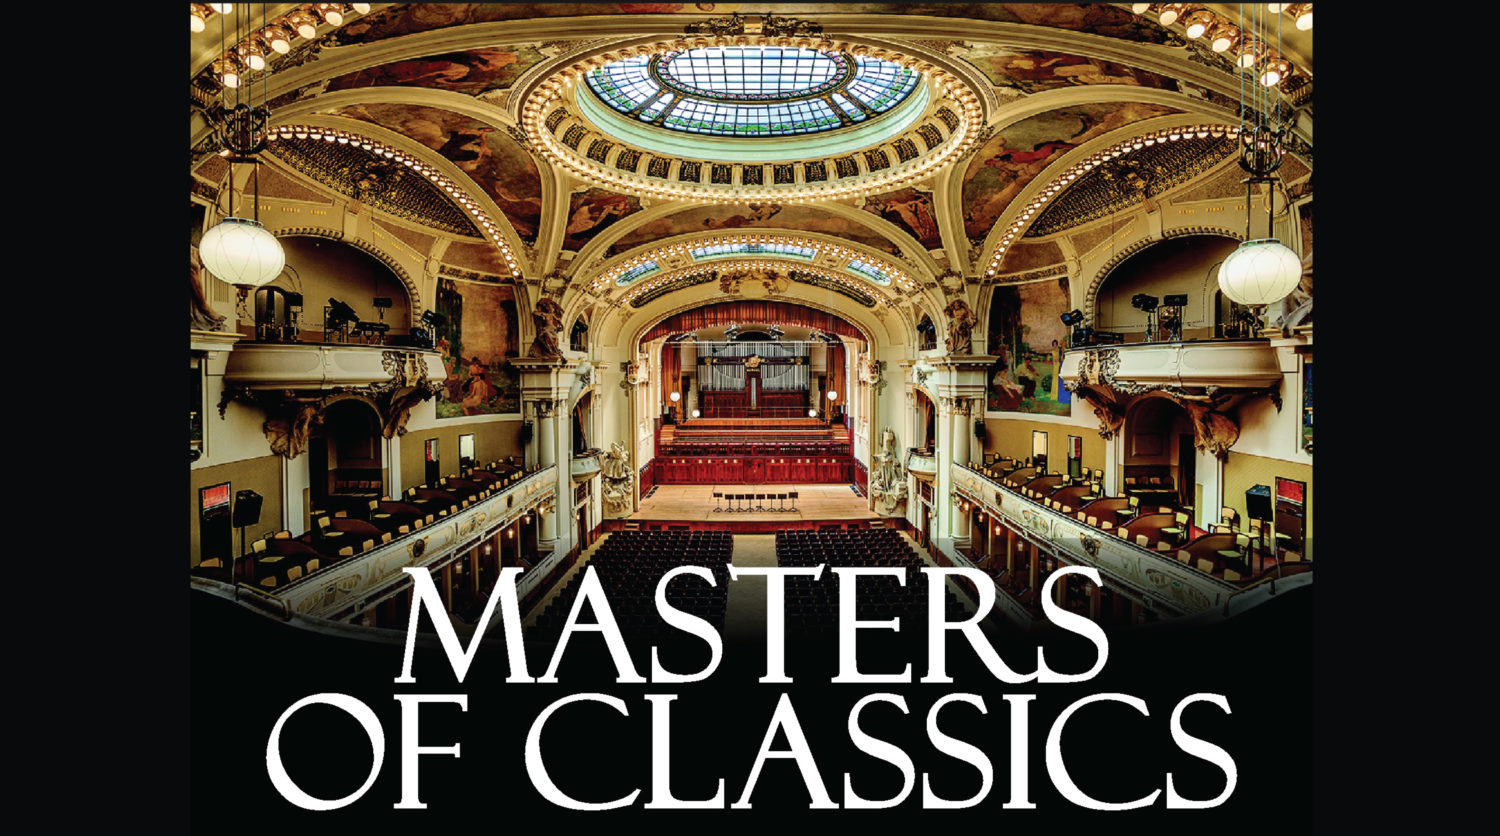 MASTERS OF CLASSICS IN THE MUNICIPAL HOUSE 19.02.2019